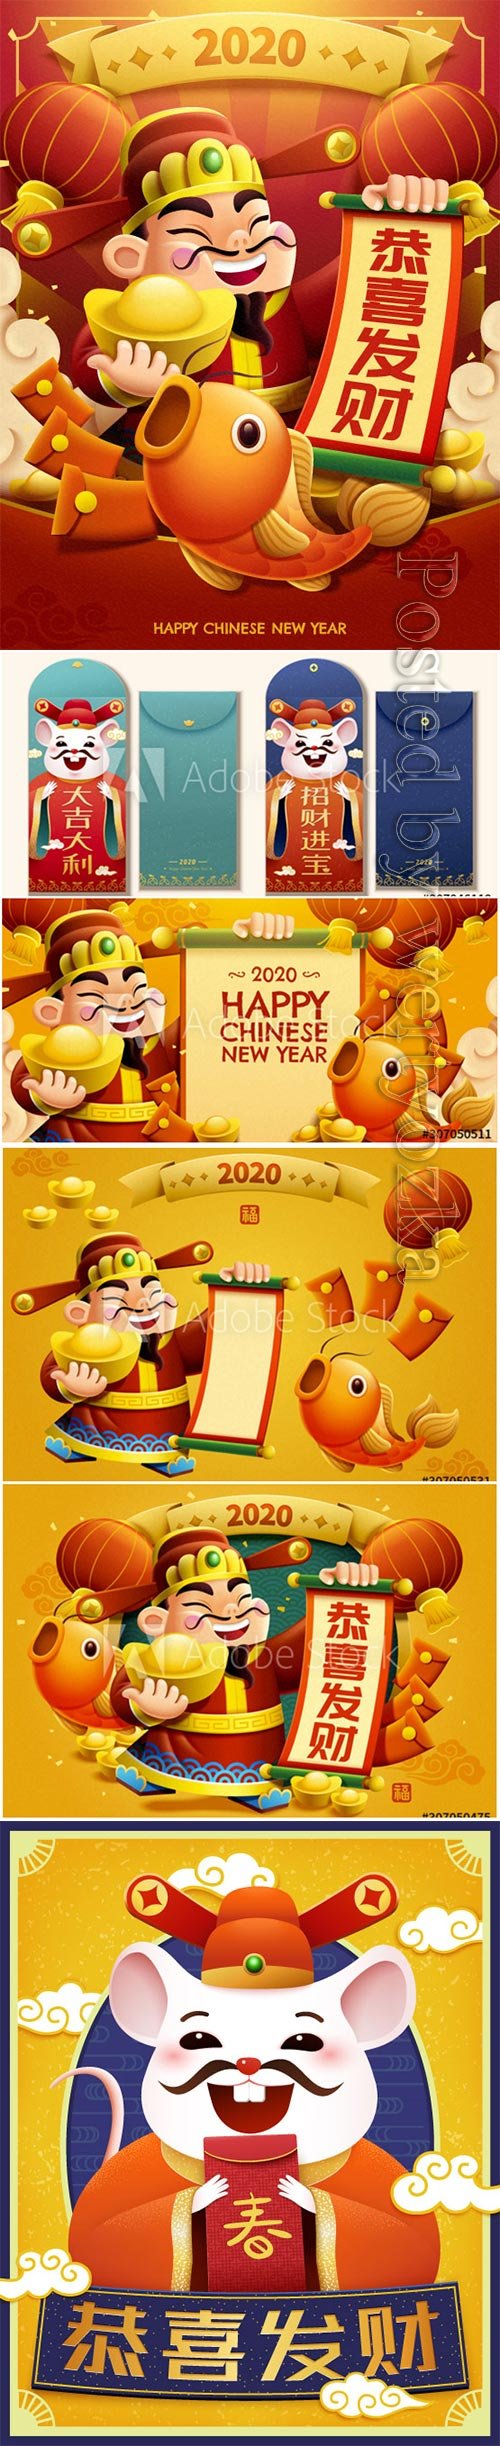 Blessing god of wealth for new year